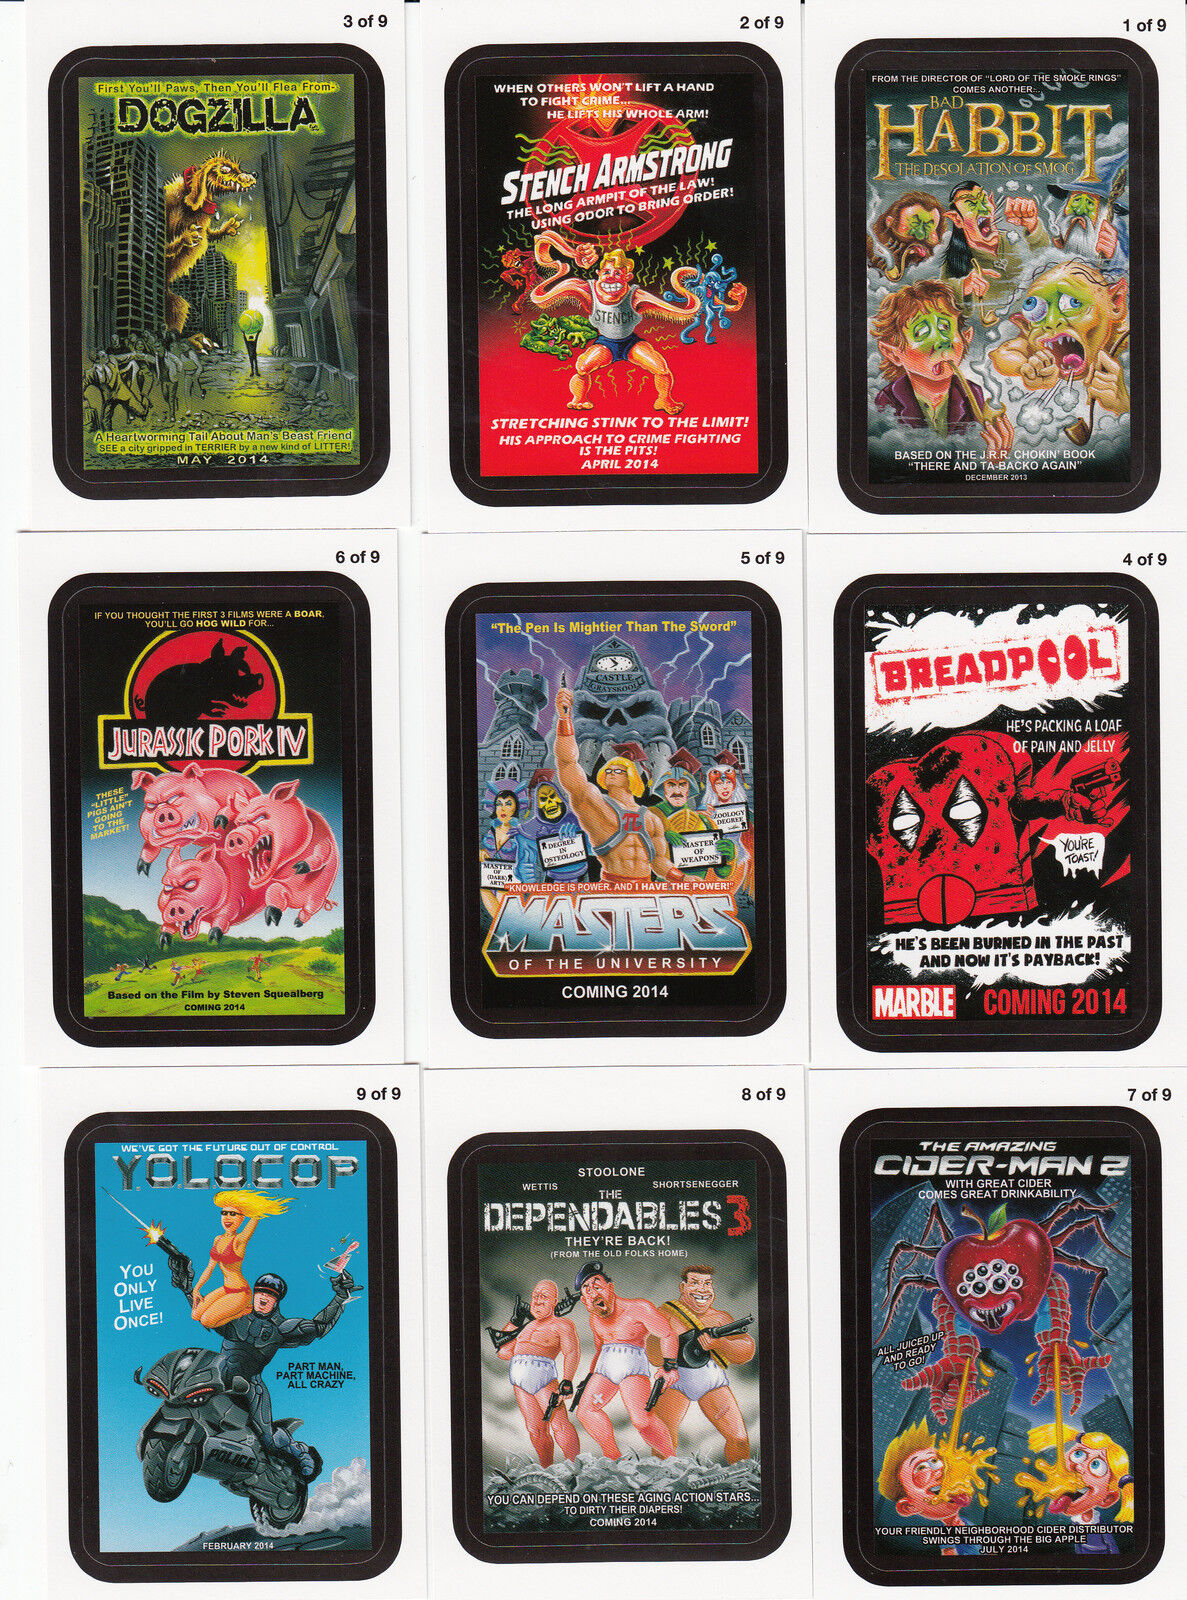 2013 WACKY PACKAGES SERIES 11 COMING DISTRACTIONS COMPLETE SET 9/9 MOVIE PARODY